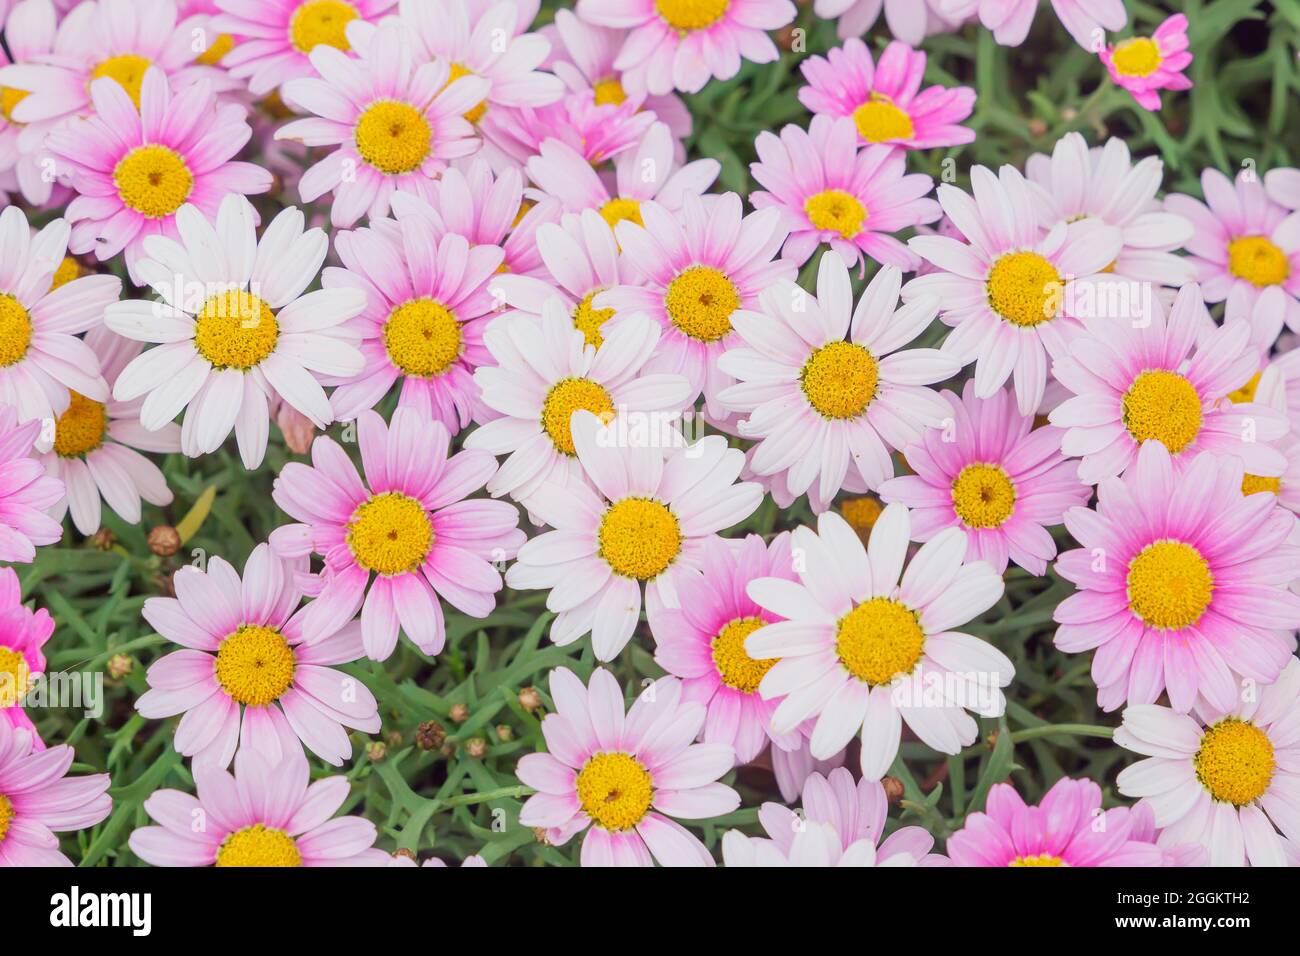 White Daisies and Pink Daisies in full bloom, Genoa, Liguria, Italy Stock Photo